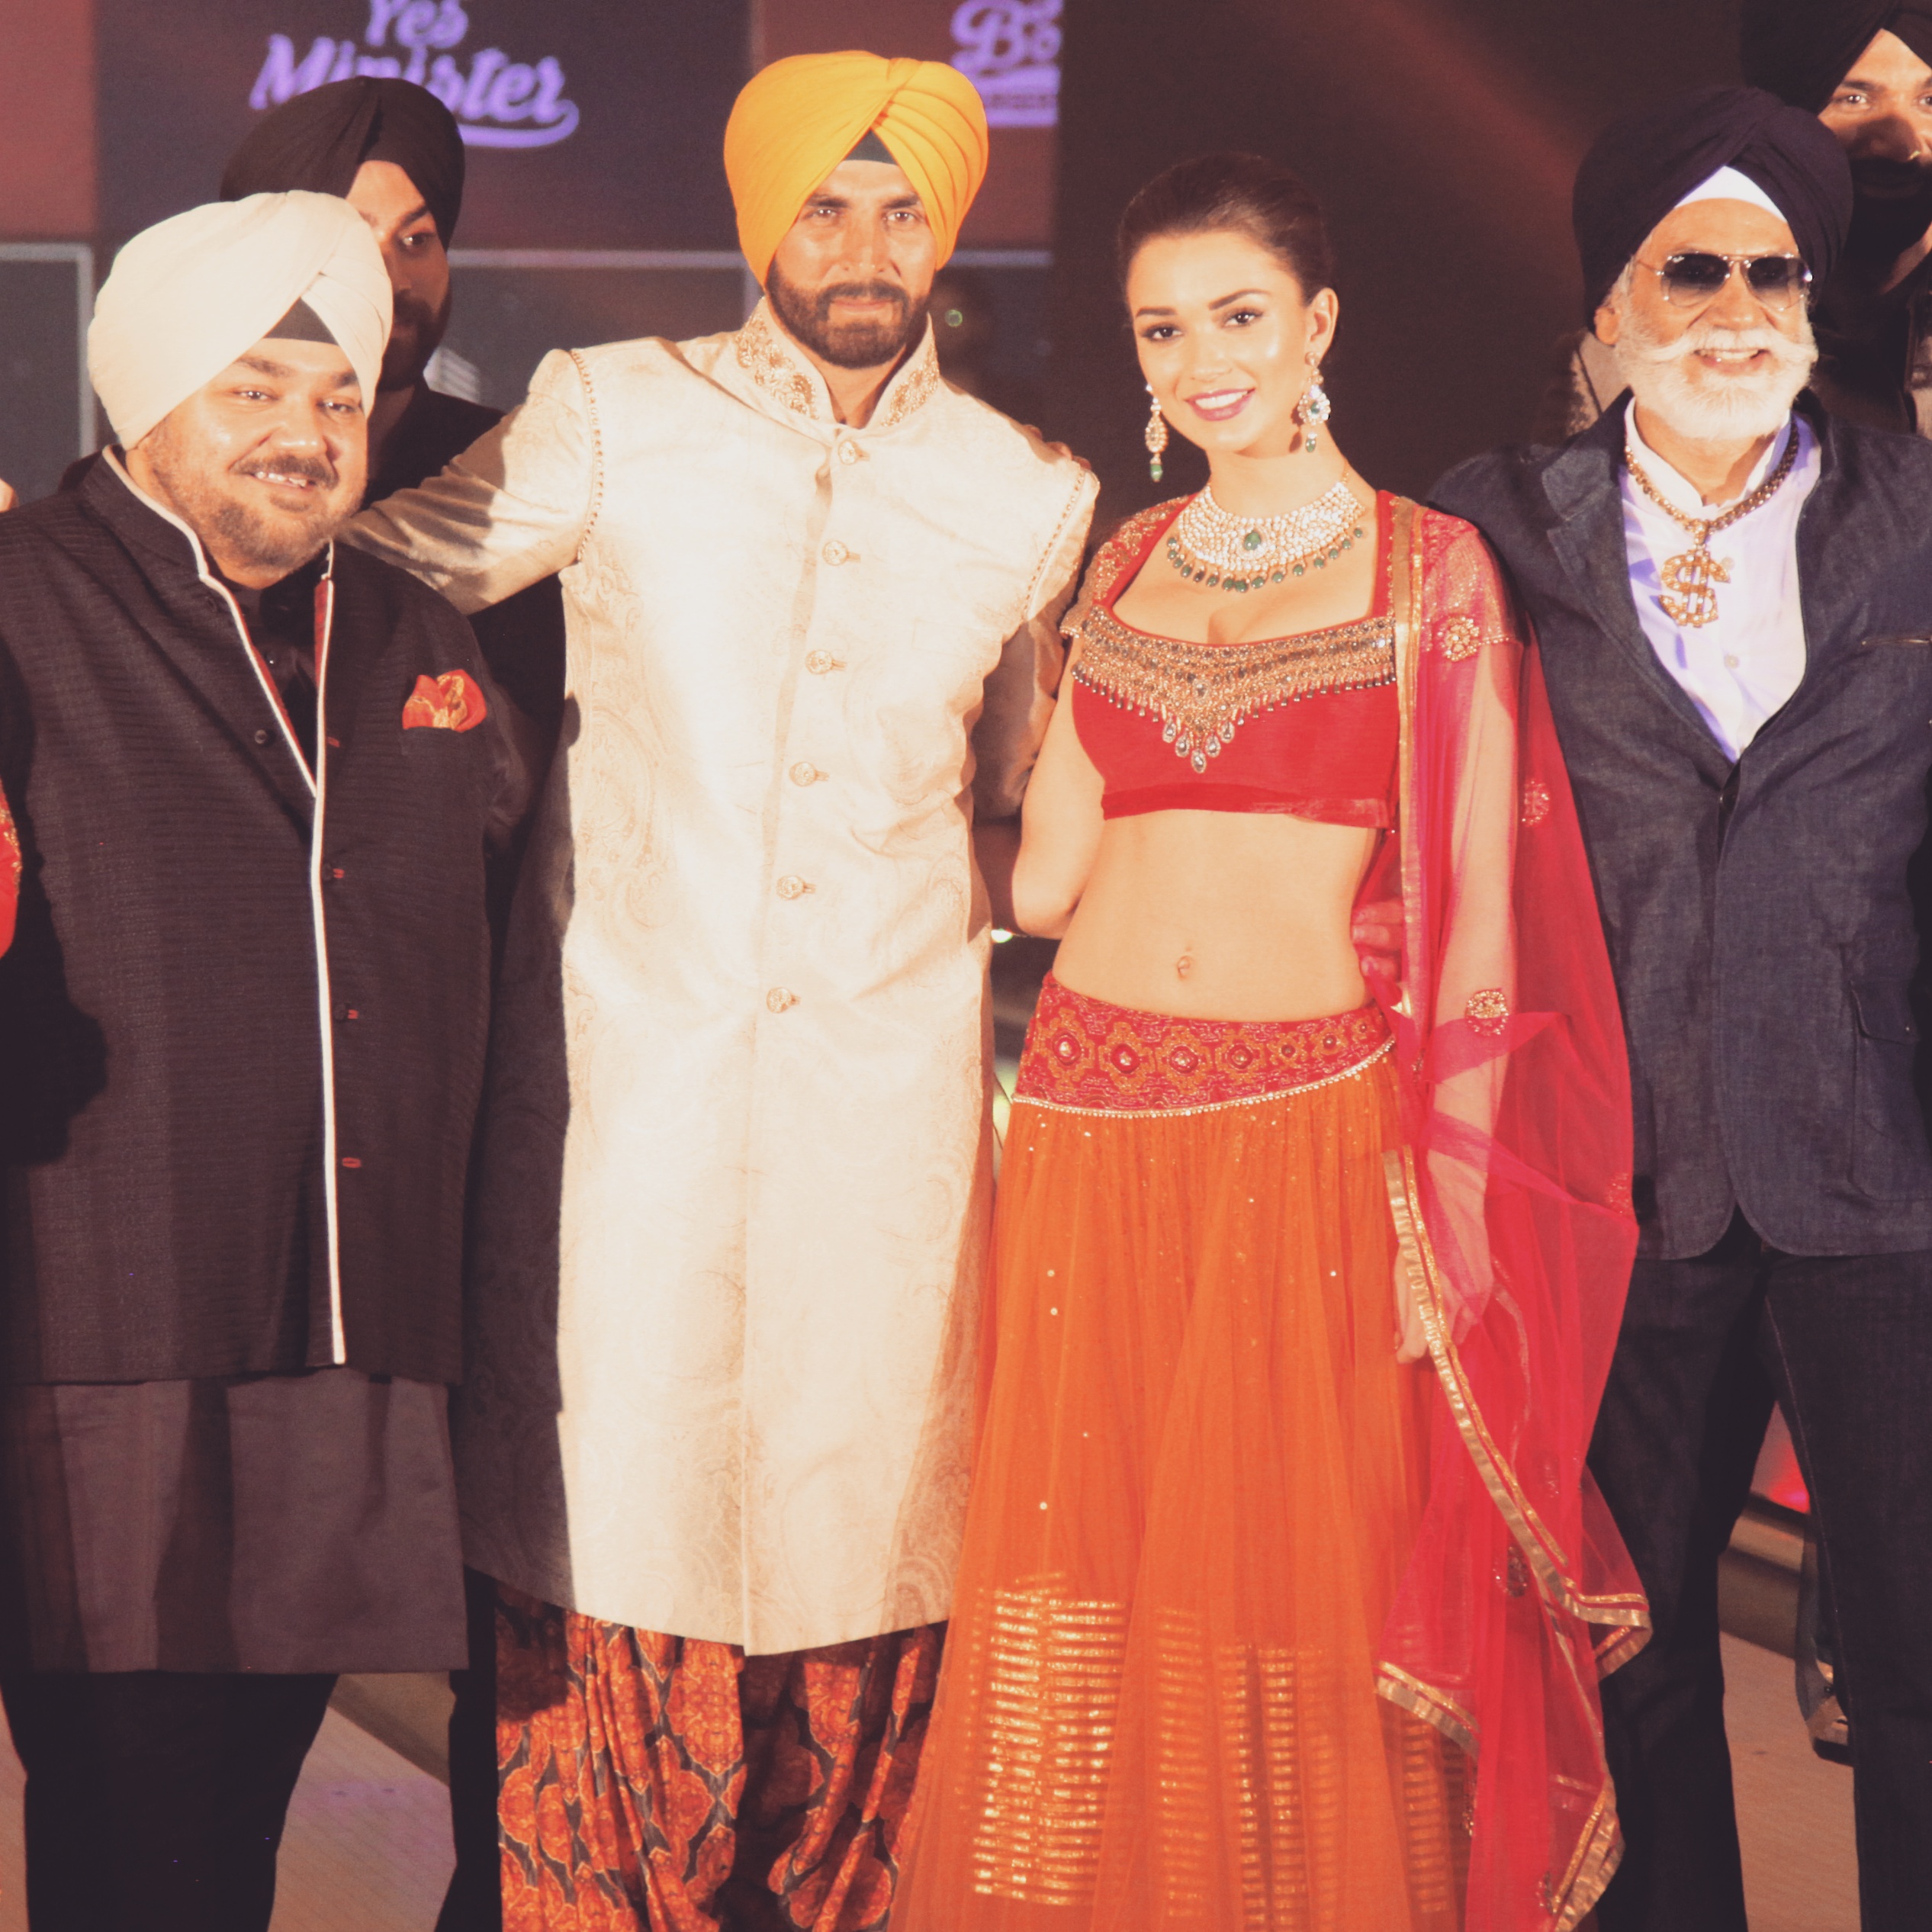 Style And The Sikh, an evening hosted by @thefdci president Sunil Sethi, saw actors Akshay Kumar and Amy Jackson come together to salute the contribution of Sikh community in fashion industry. Check out designer J.J. Valya and Mr Sethi's bling singh avatar for this show, so cute isn't it? 